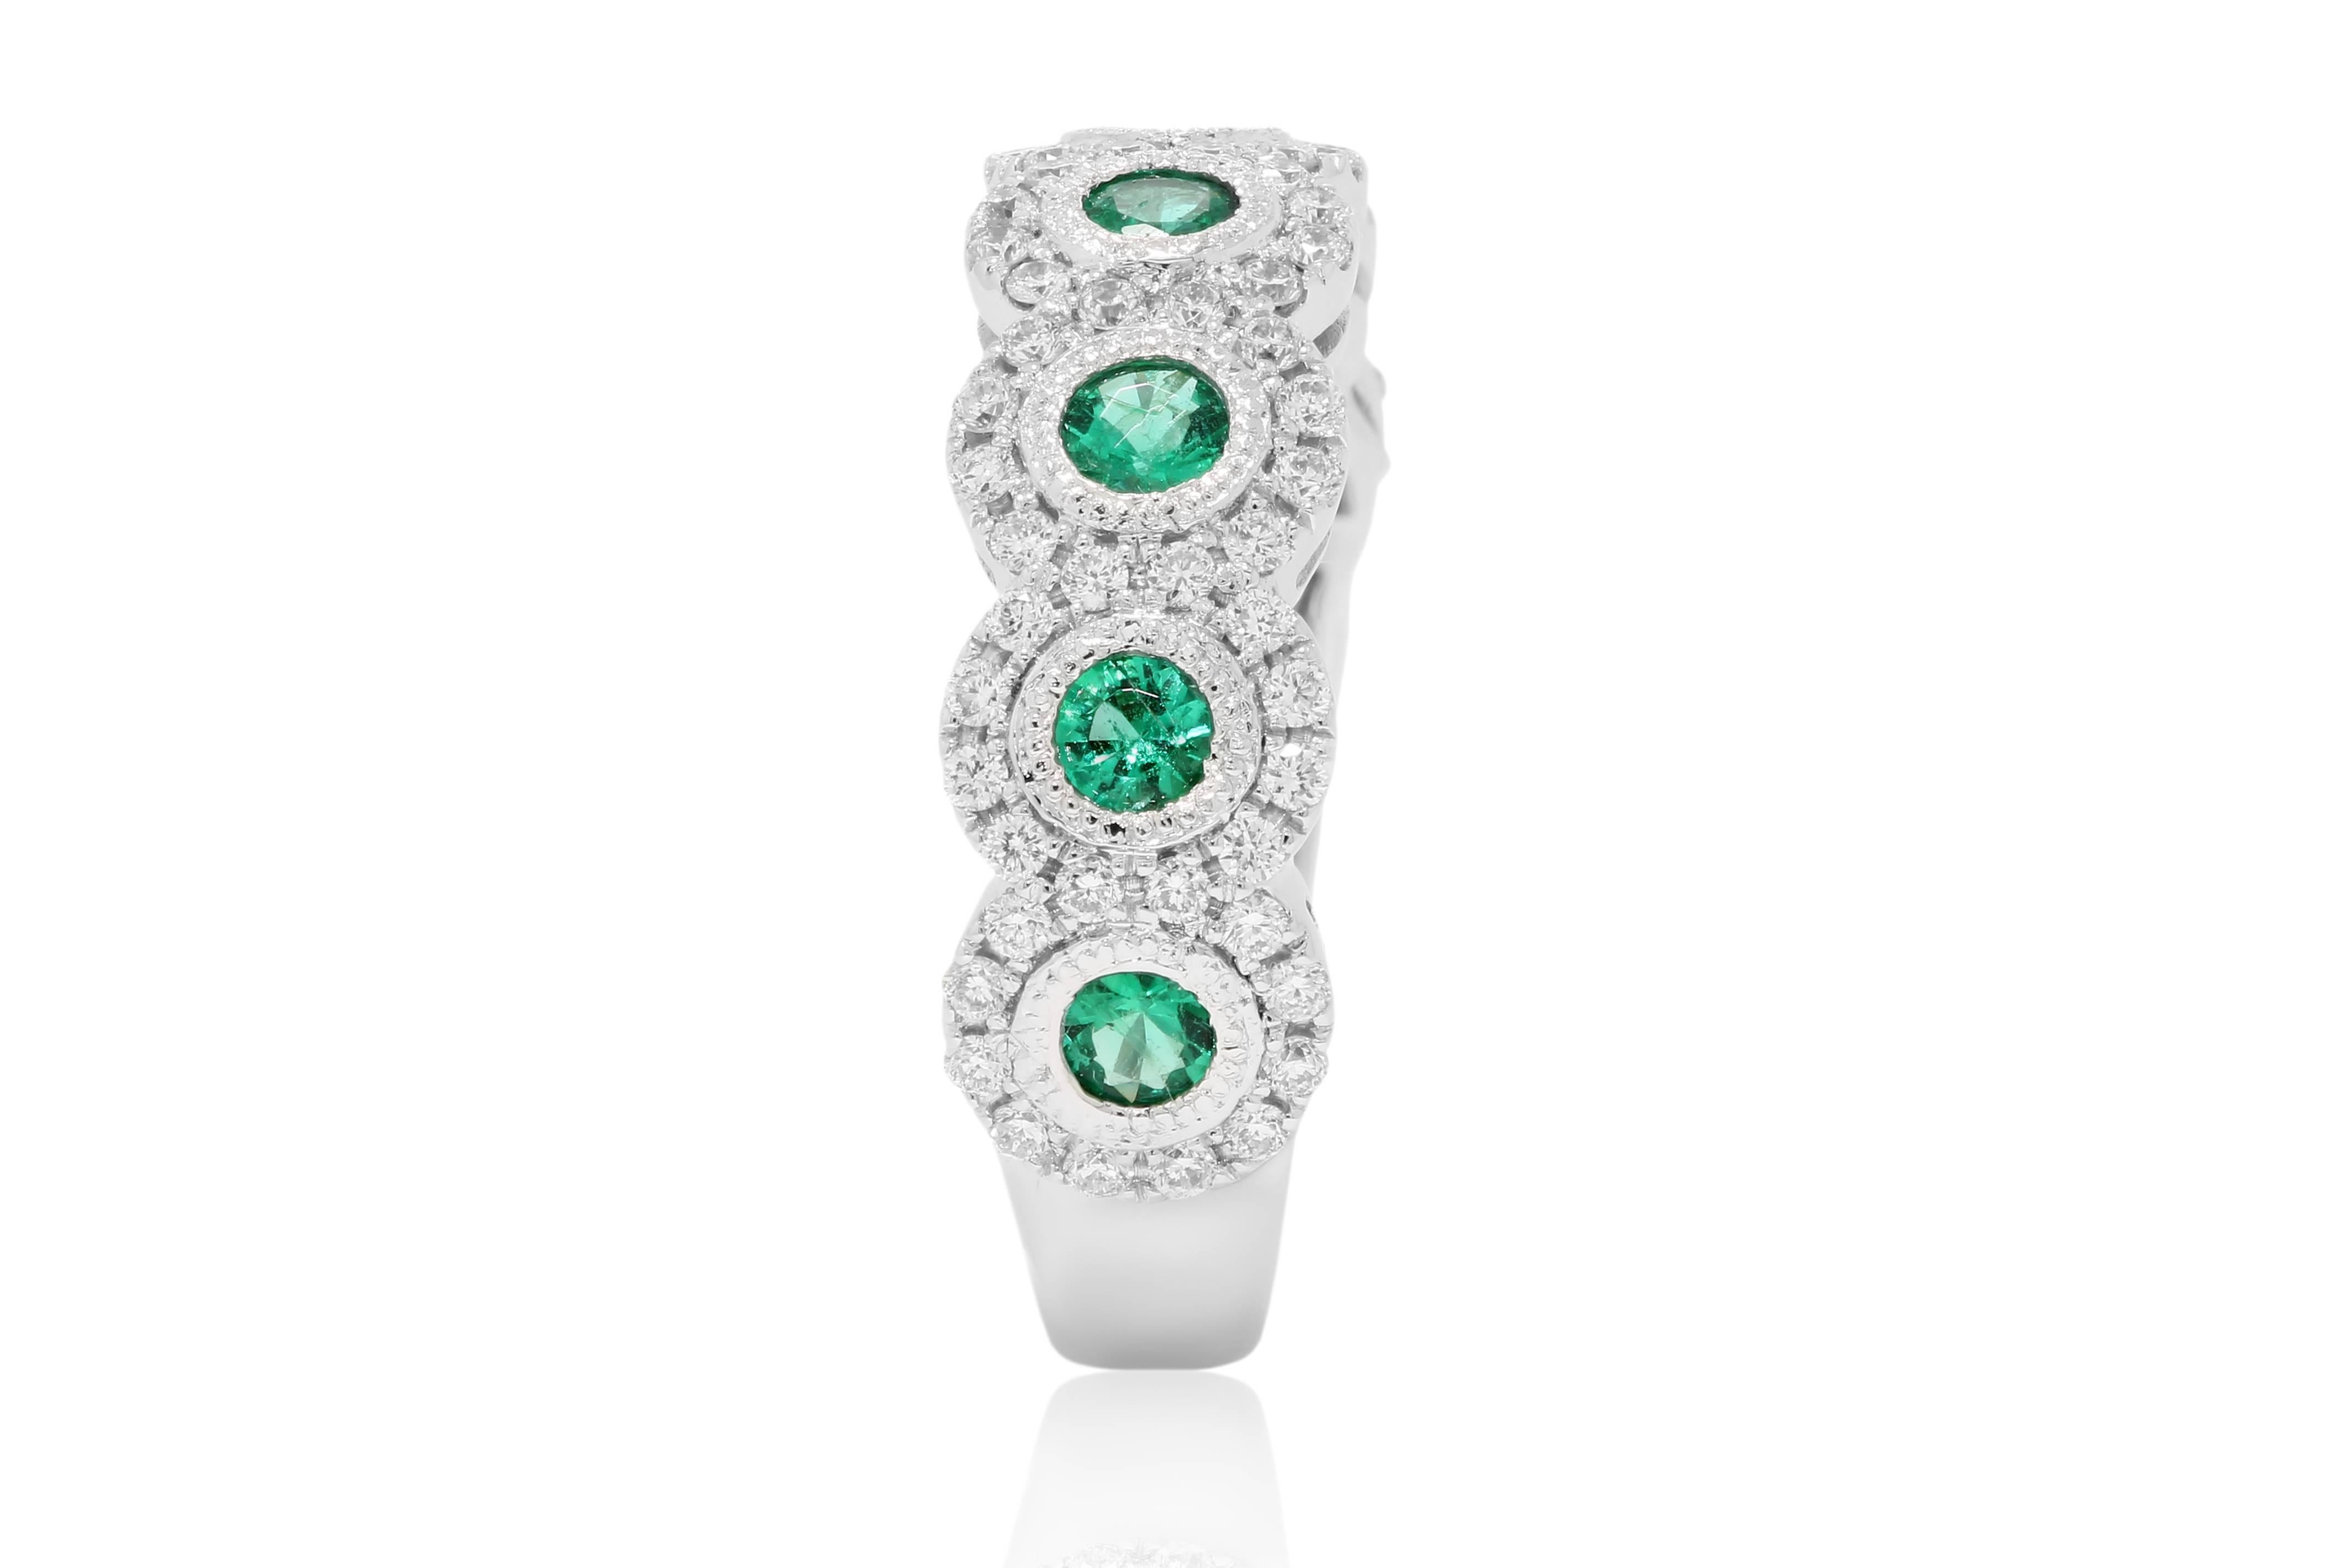 7 Emerald Round 0.61 Carat in a halo of white diamond 0.5c carat in 14k White Gold Band Ring.